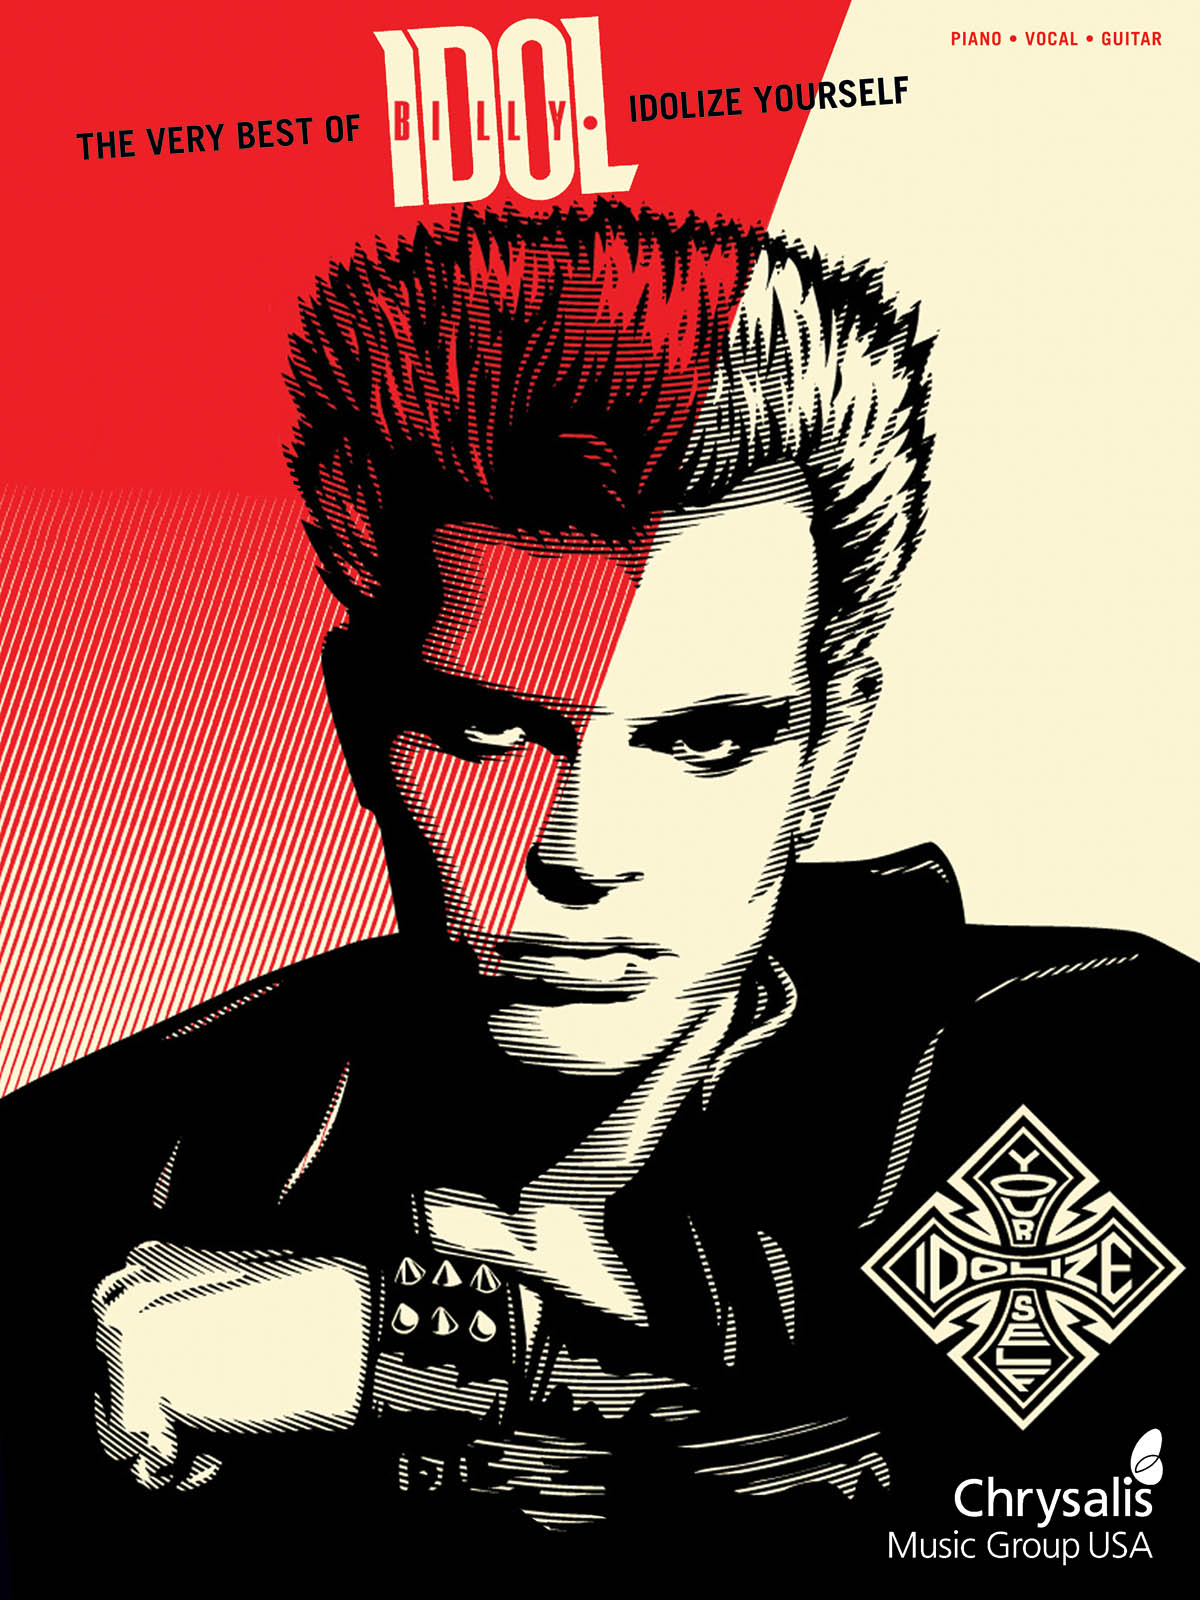 Billy Idol: The Very Best of Billy Idol - Idolize Yourself: Piano  Vocal and